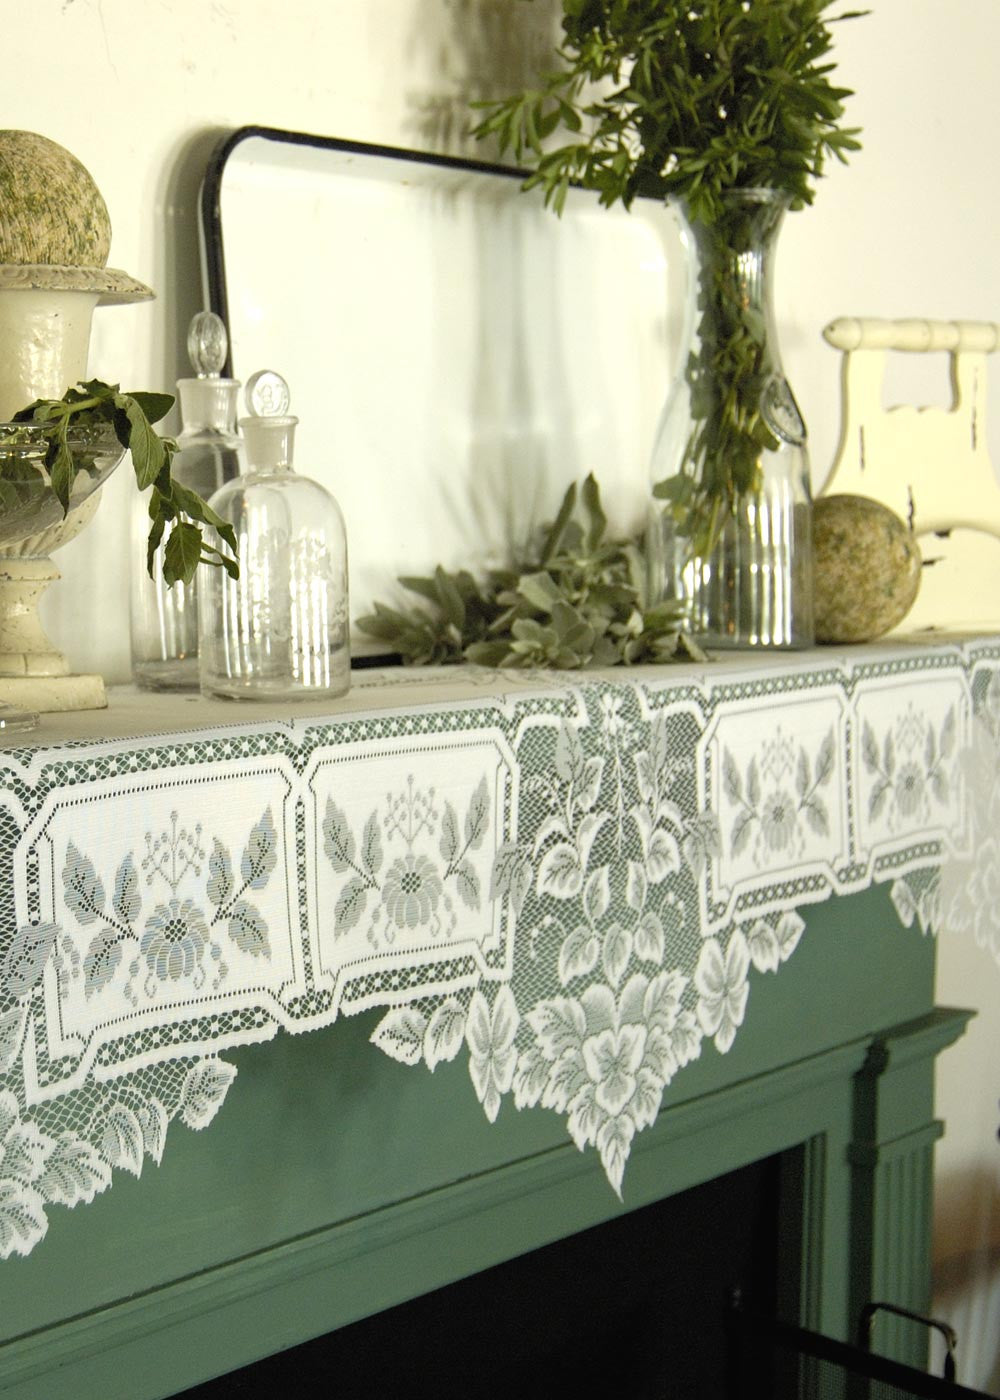 Heritage Lace Heirloom Collection - Curtains, Doilies, Placemats, Runners, Tablecloths, etc. [Home Decor]- Olde Church Emporium